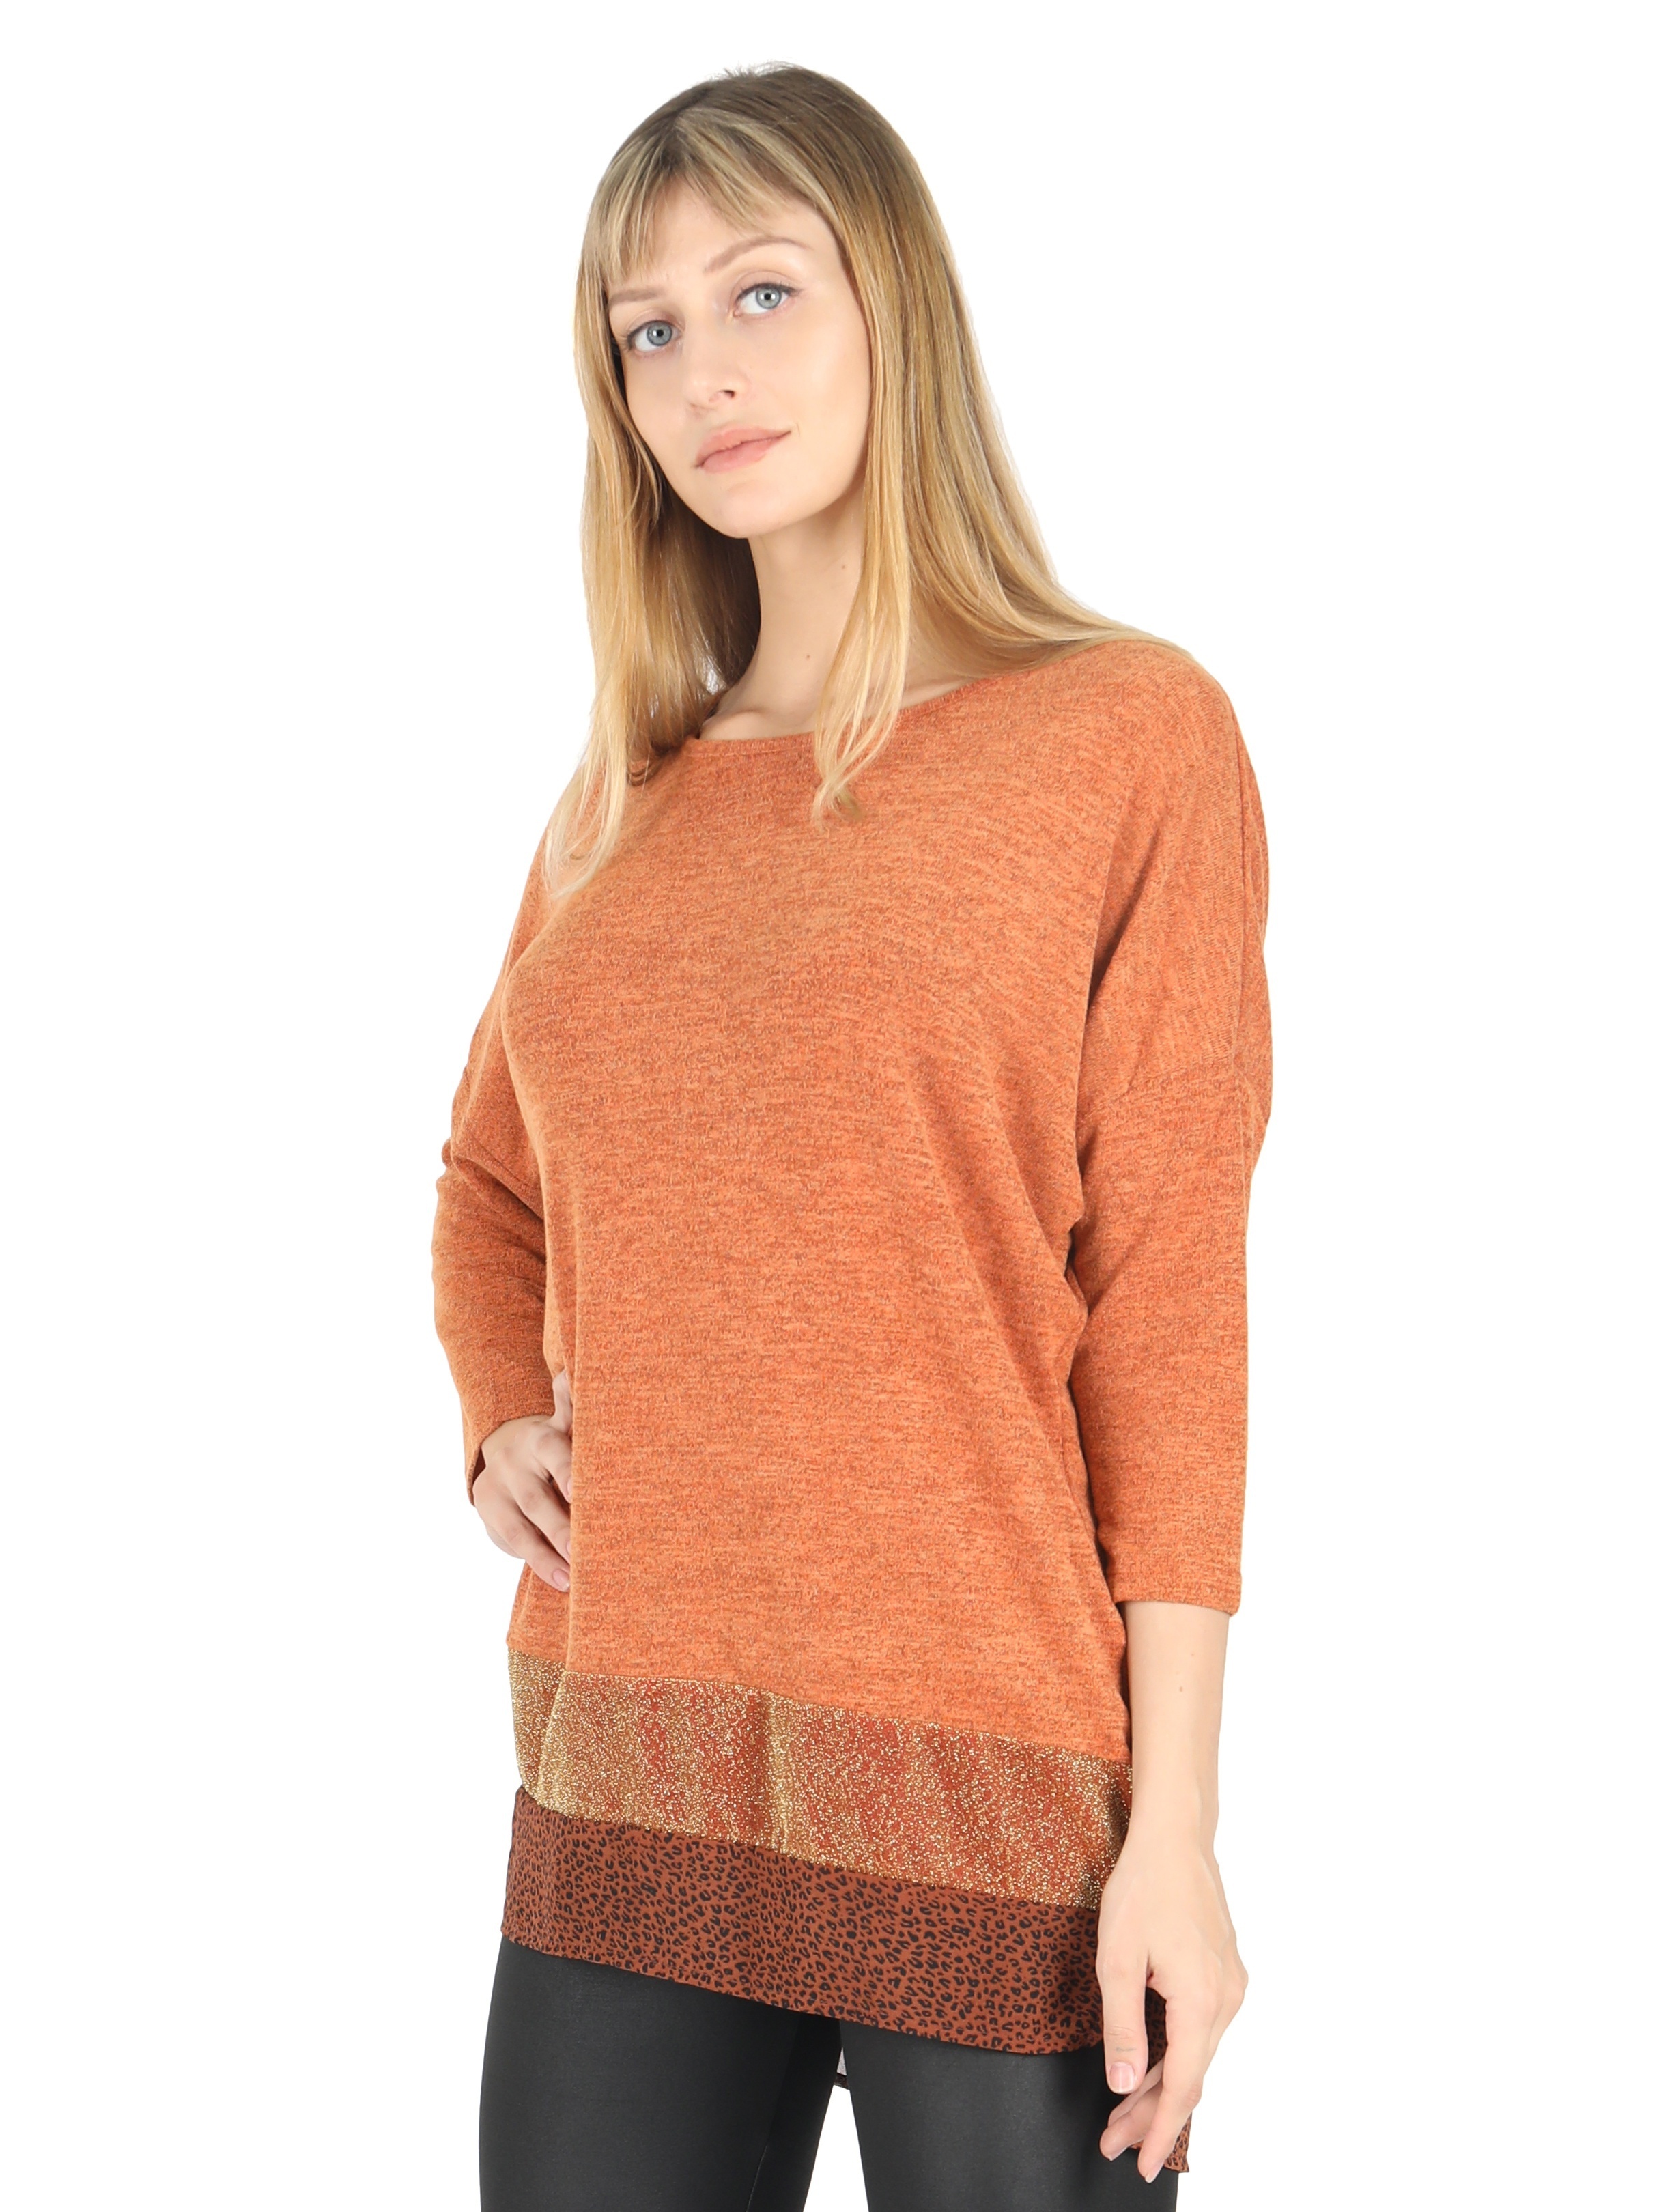 Spring Pocket Tunic! #long #tunic #tops #with #leggings #summer